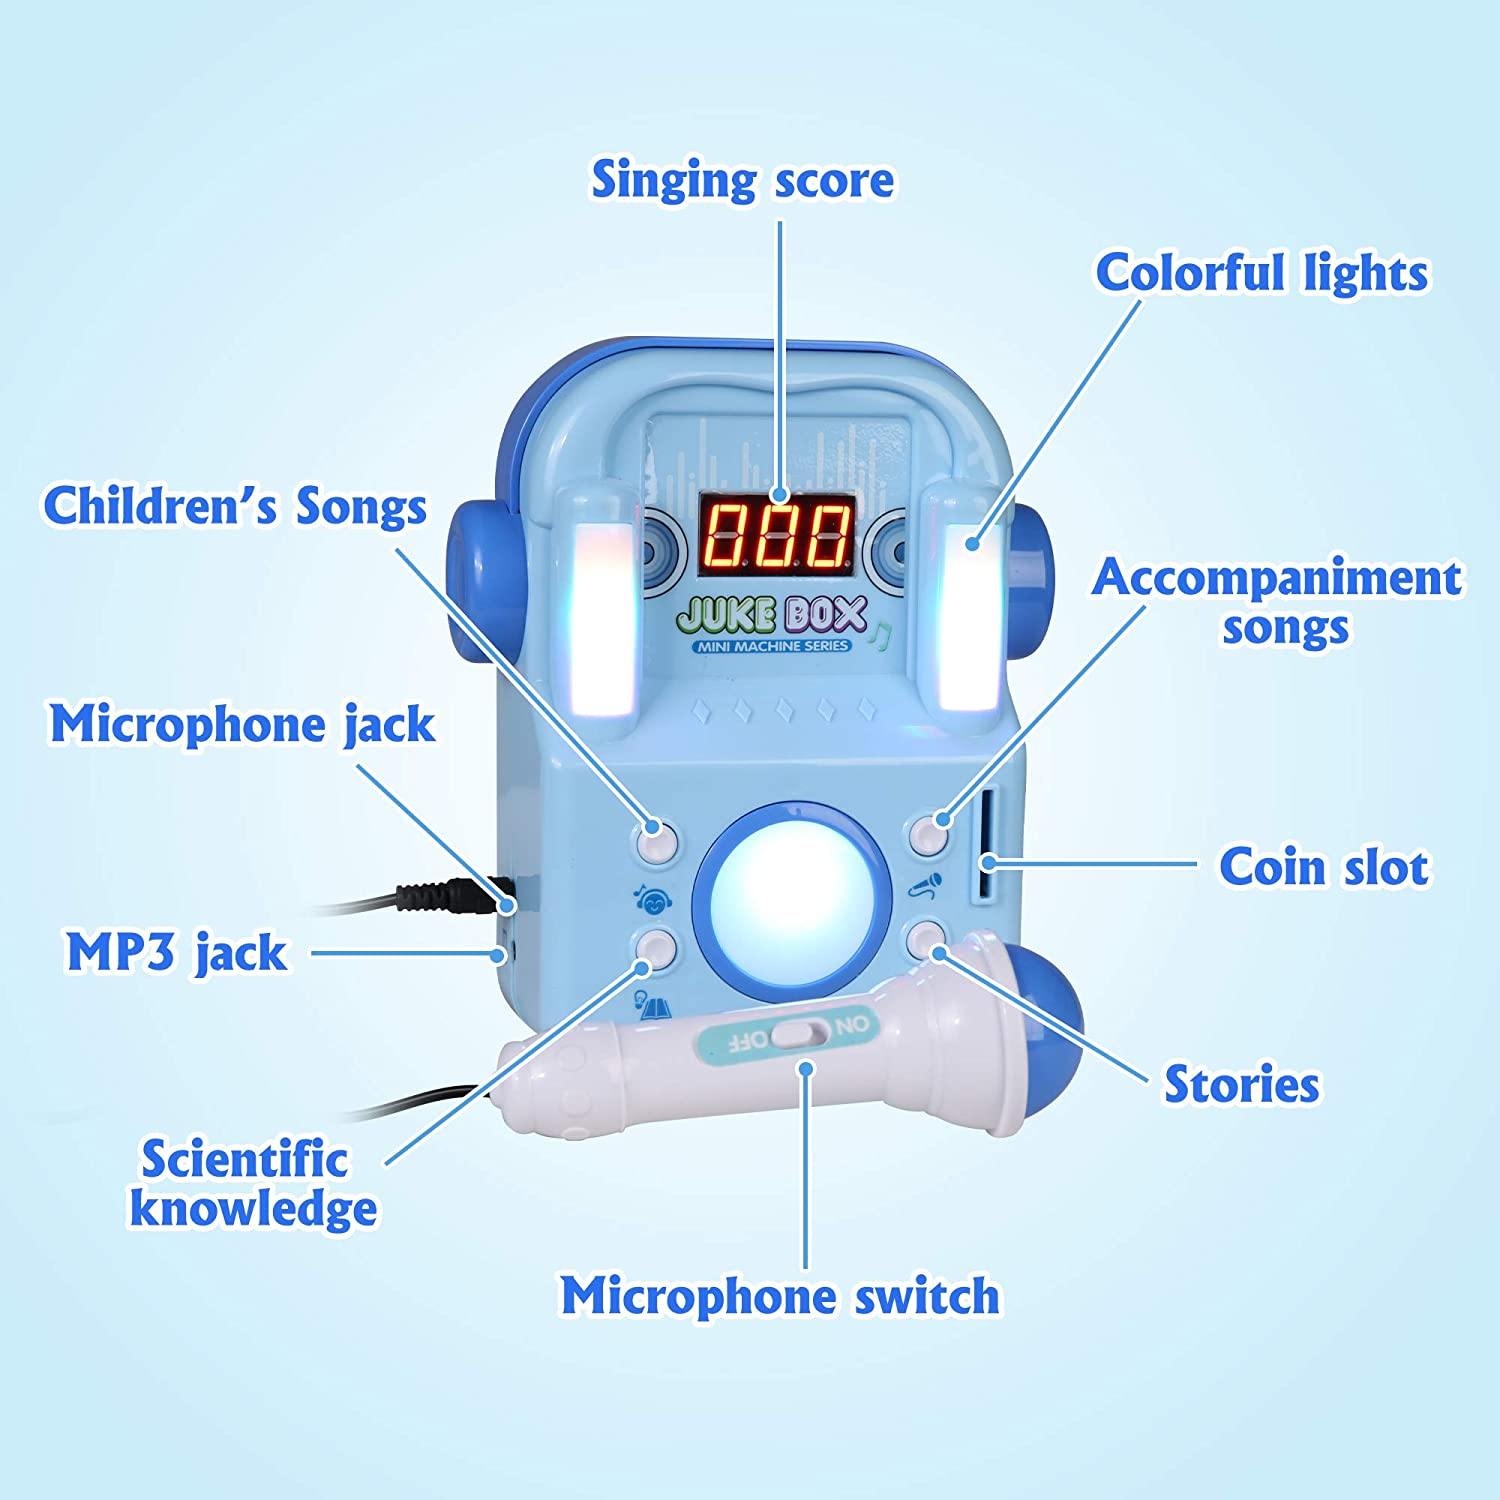 Children's Karaoke Speaker Kids Jukebox with Microphone - Portable Mini Machine for Singing Songs - for Indoor and Outdoor, Blue - Bosonshop